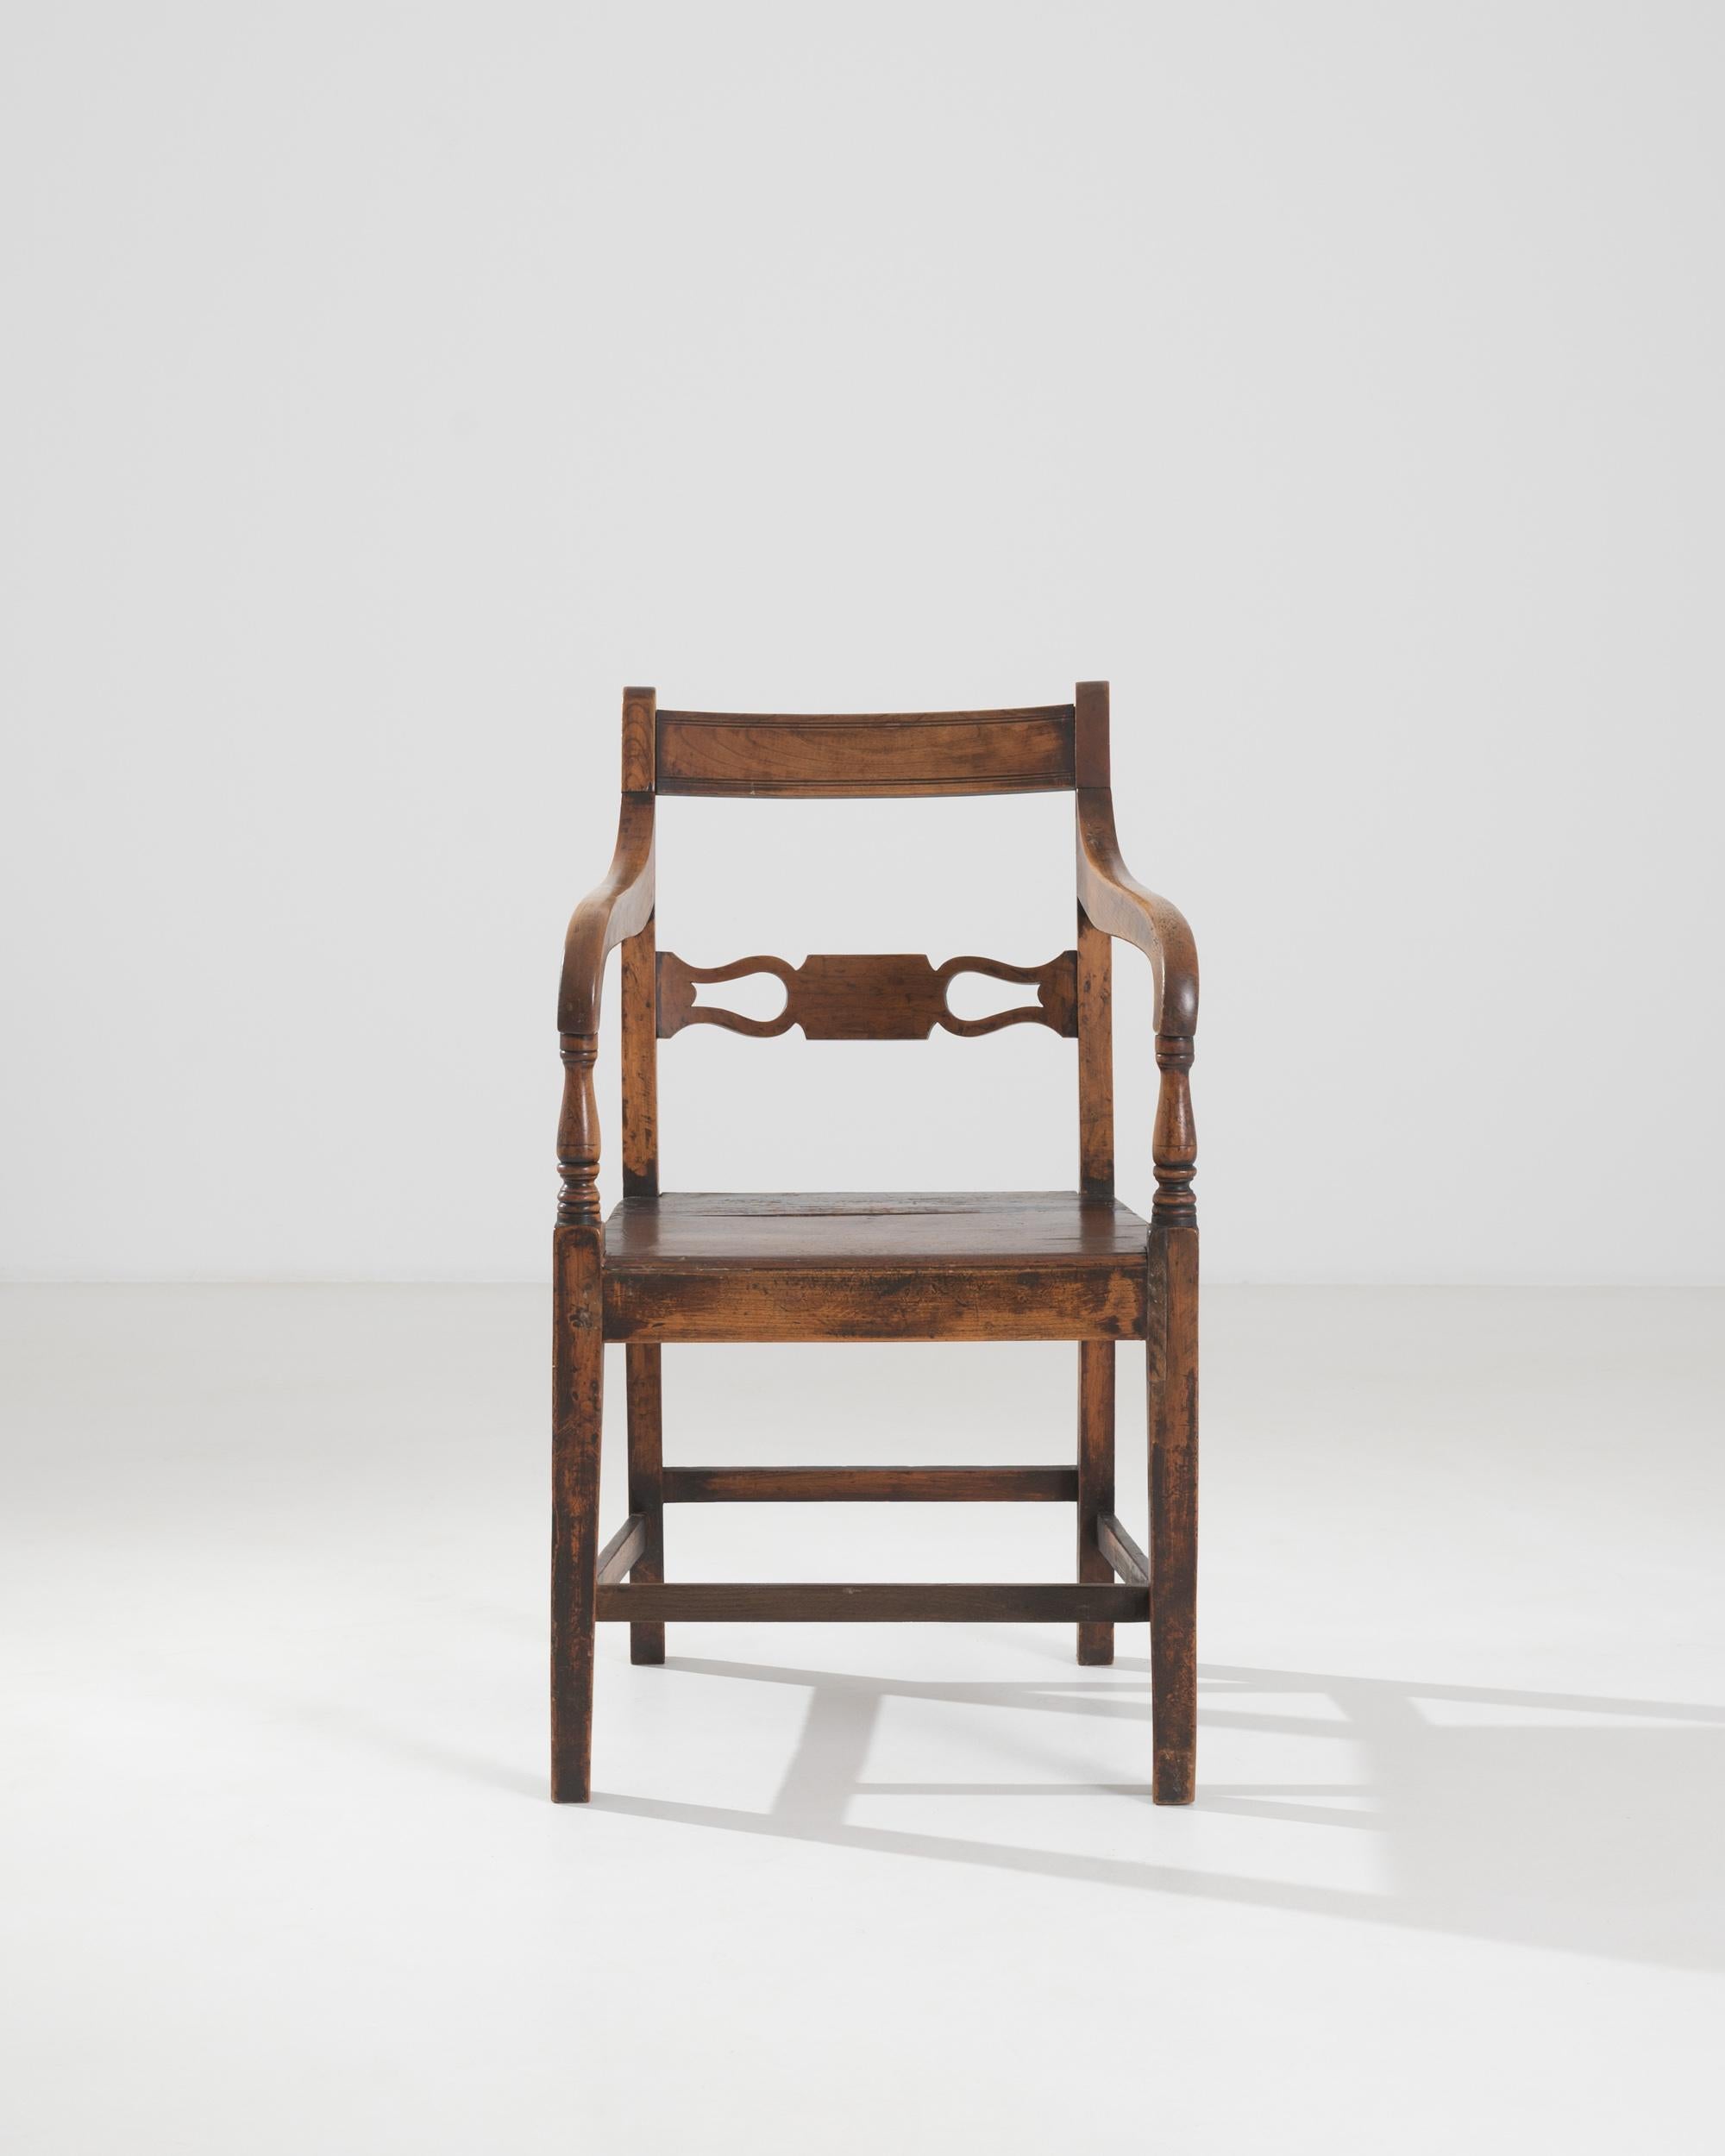 A British chair from the 19th century. This wooden chair offers a comfortable and elevated moment of rest. The carved back curves ergonomically, while sloping arm rails and square legs create a harmonious synergy throughout its construction. Its